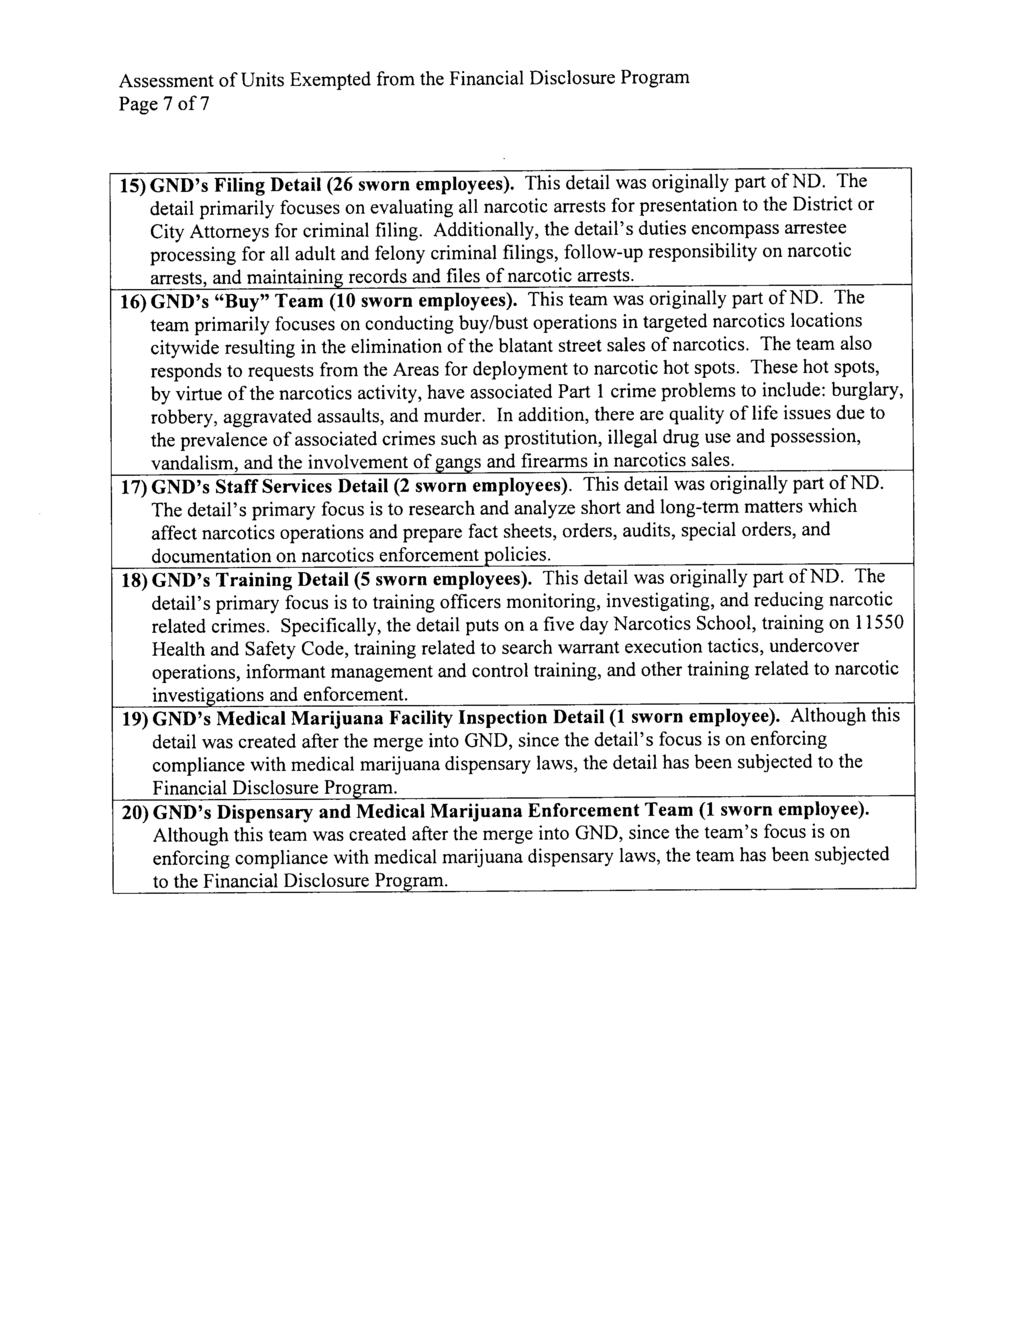 Page 7 of 7 15) GND's Filing Detail (26 sworn employees). This detail was originally part of ND.